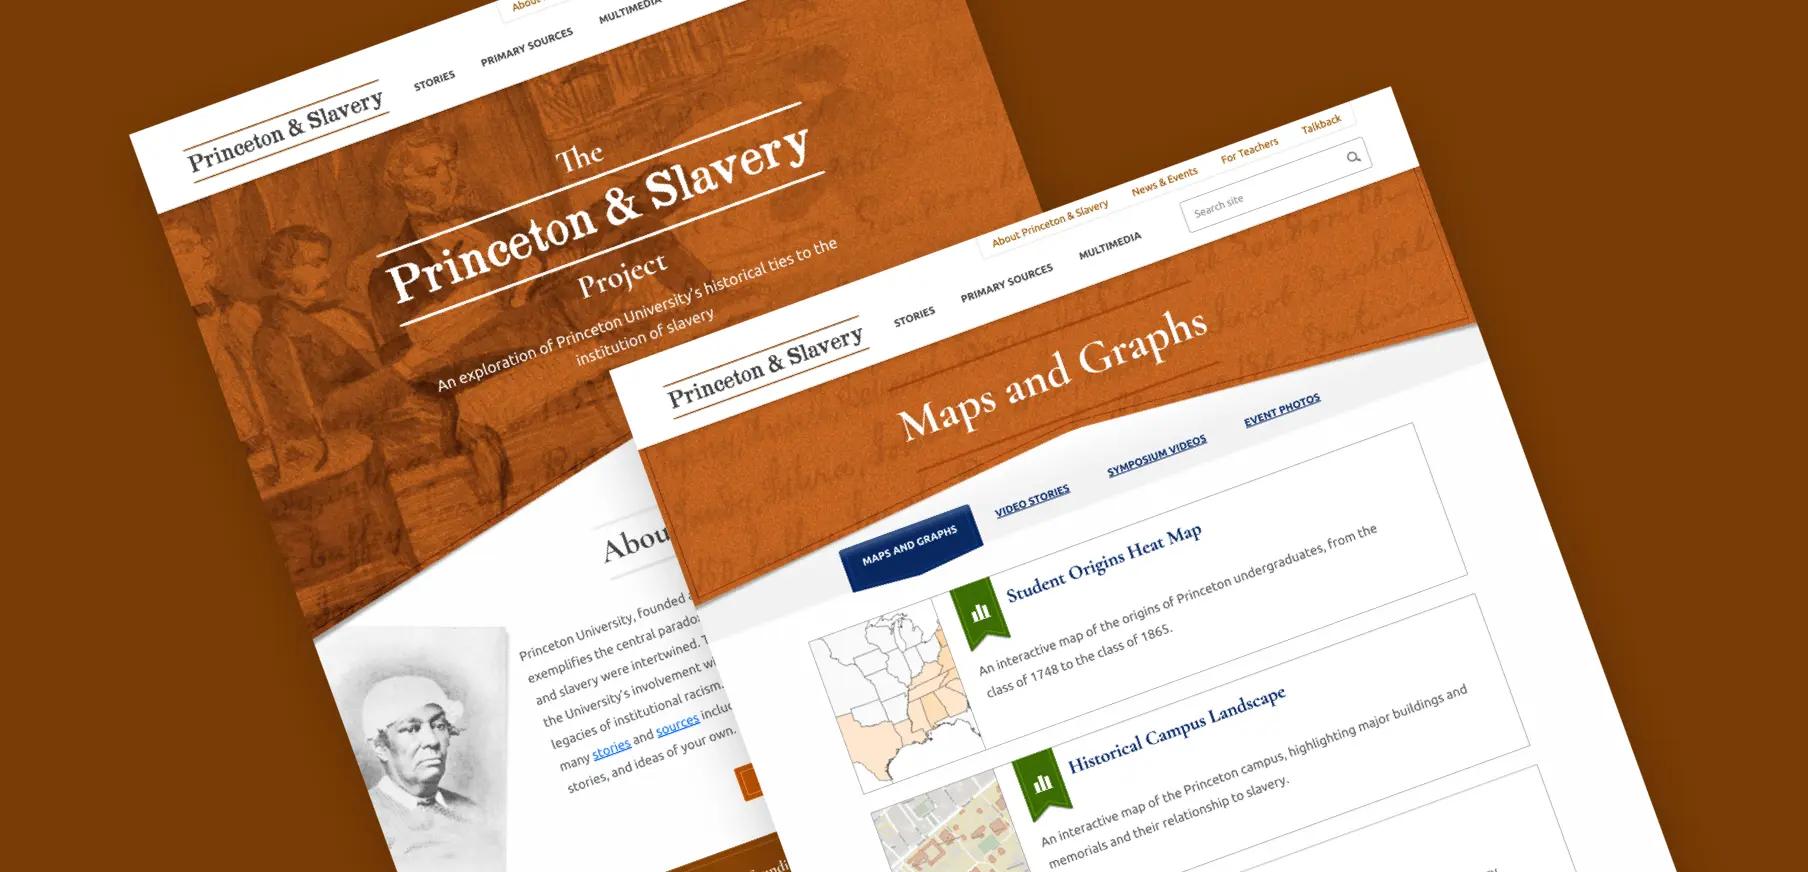 Two screenshots of our work on the Princeton & Slavery Project website.